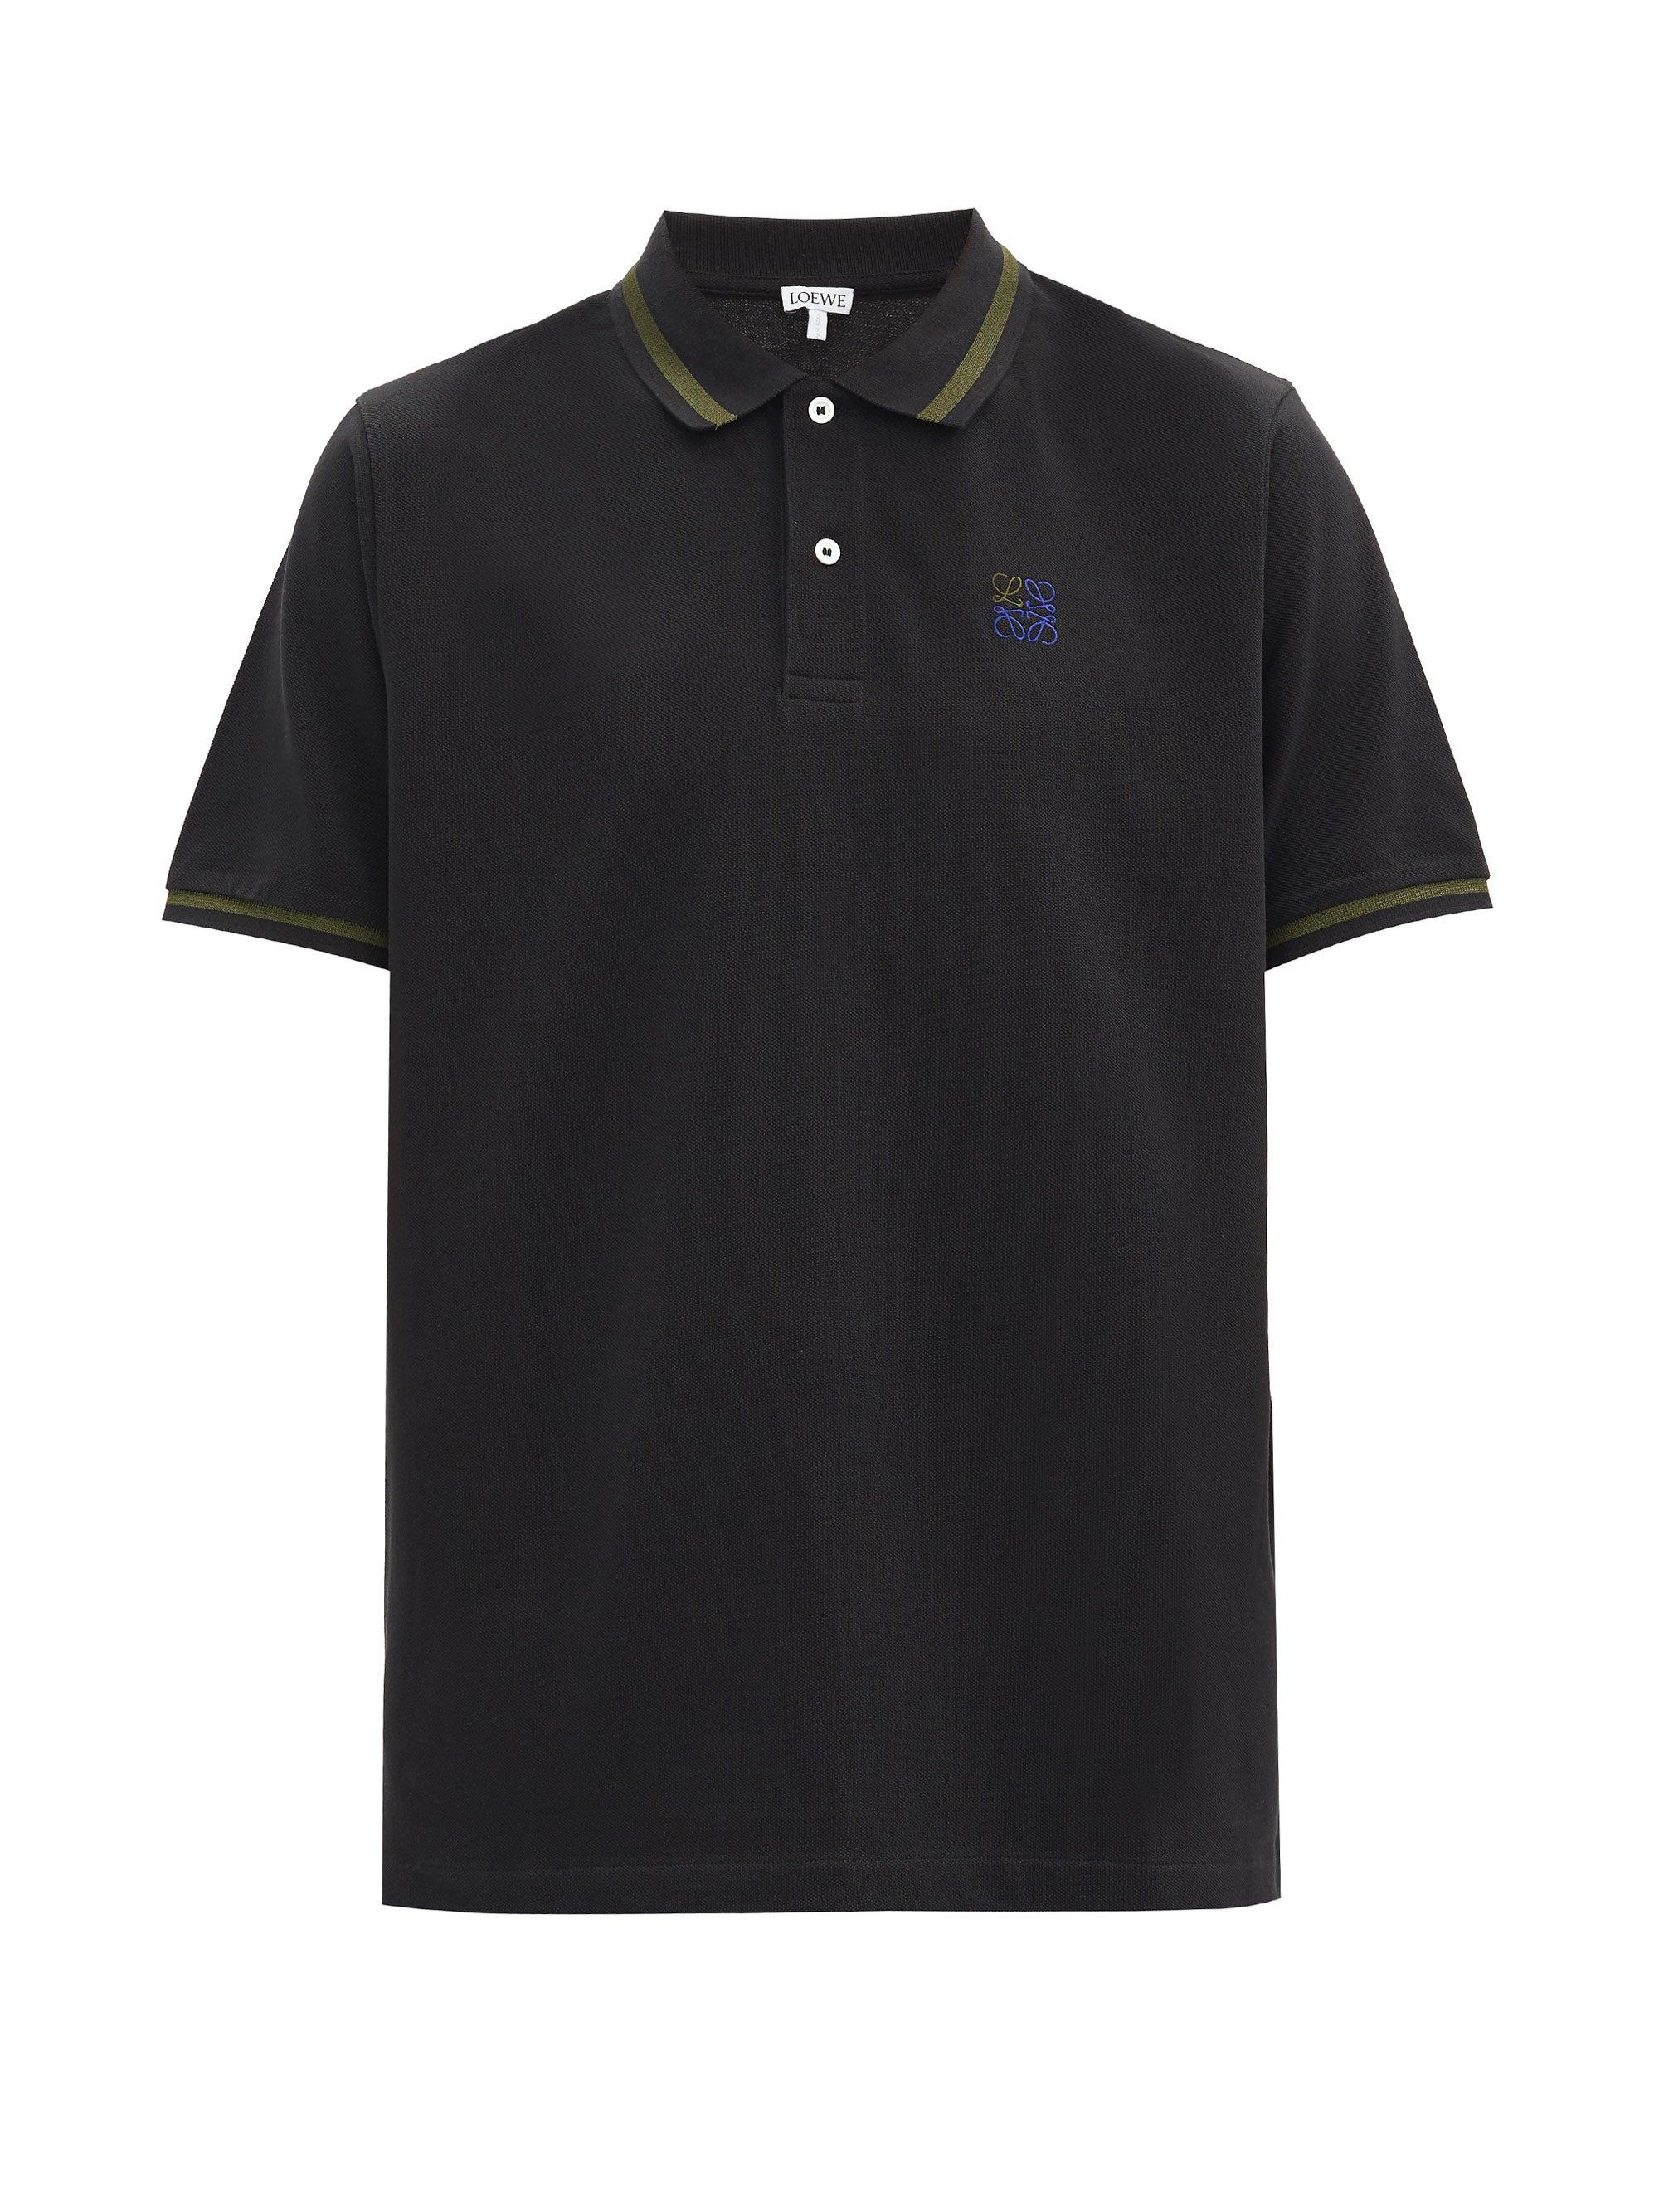 Loewe Anagram-embroidered Cotton Polo Shirt in Black for Men - Lyst